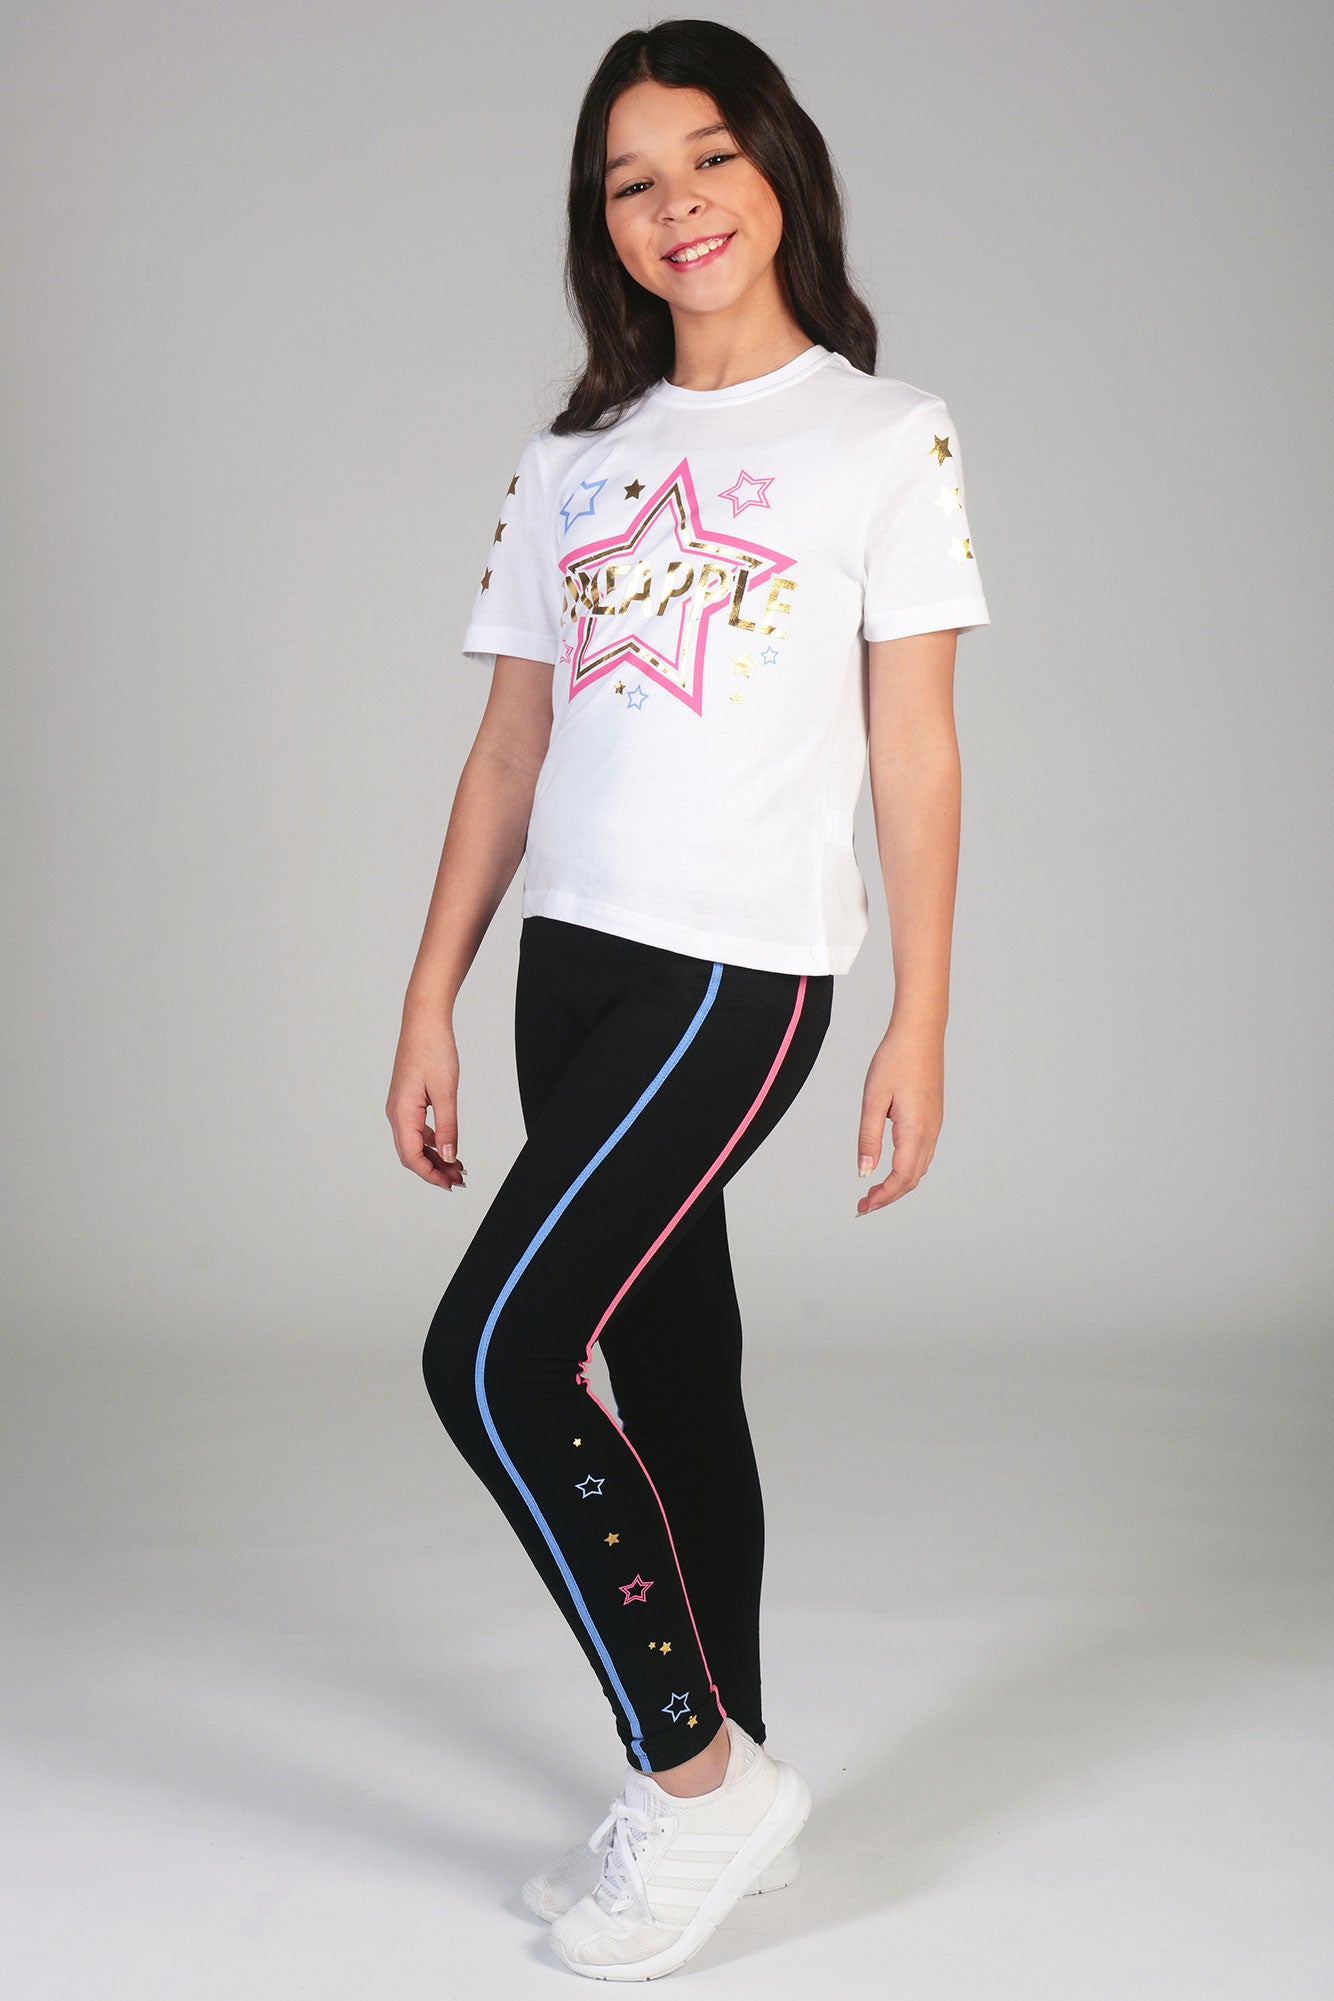 Buy Pineapple Girls' Leggings, Shorts and Joggers, Age 5-13